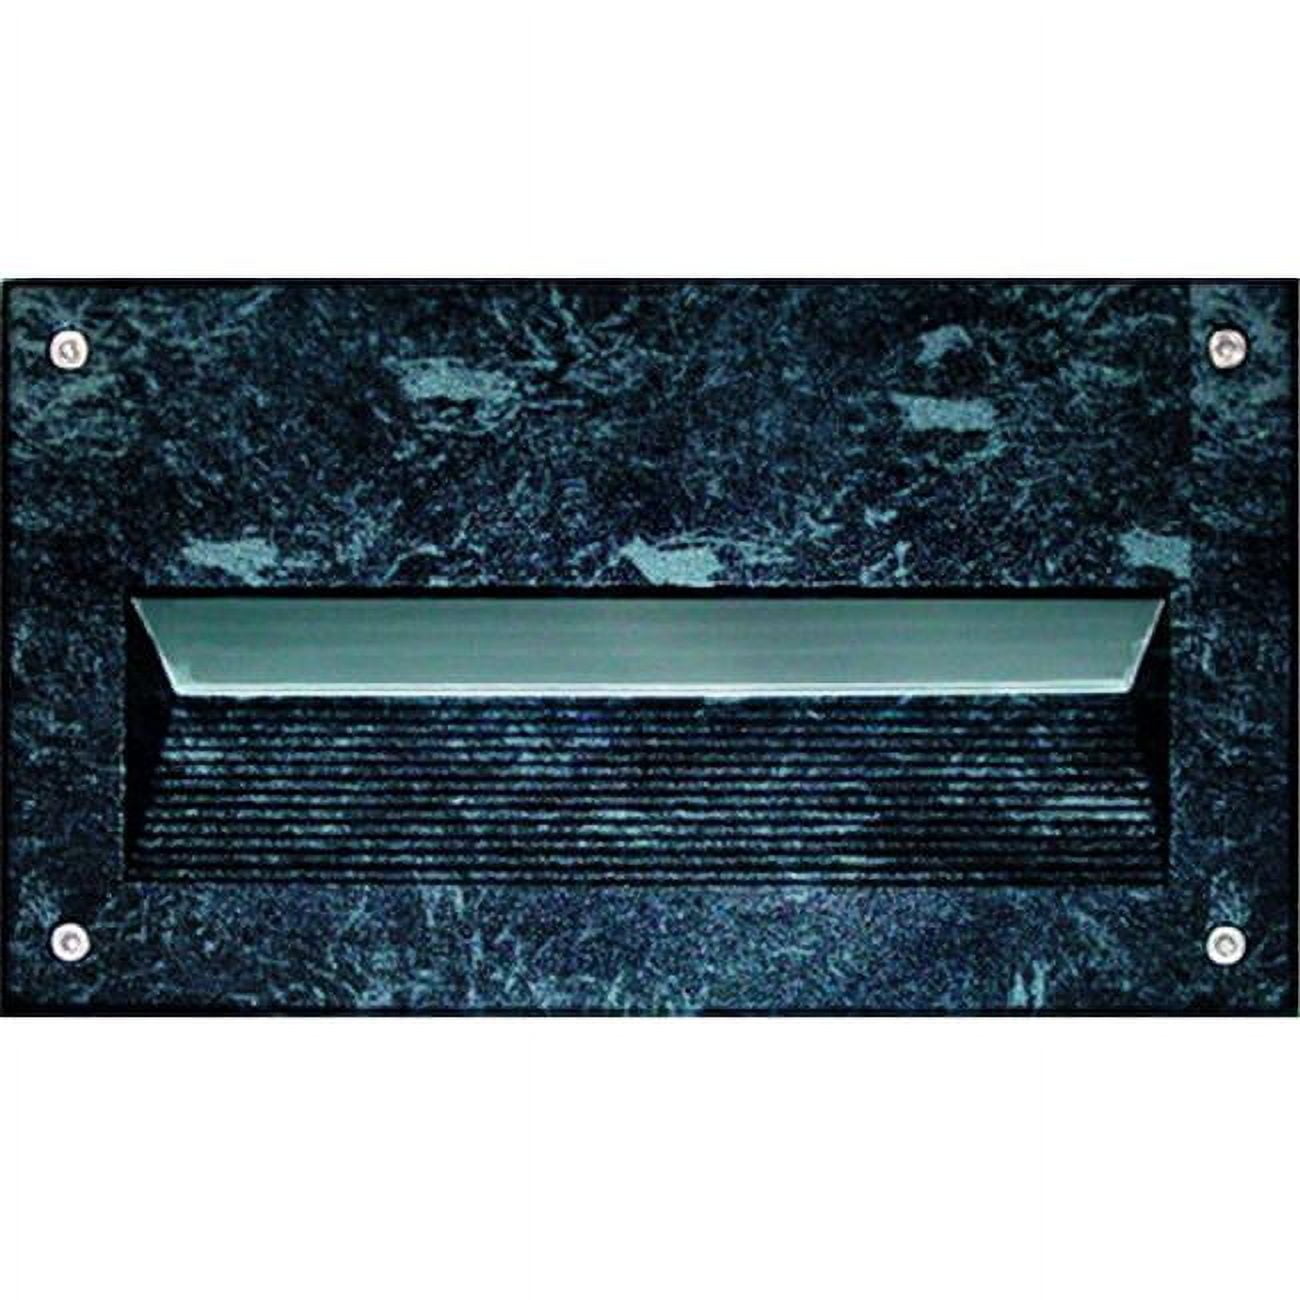 Picture of Dabmar Lighting DSL1003-VG Recessed Brick, Step & Wall Light, Verde Green - 4.95 x 8.80 x 2.90 in.